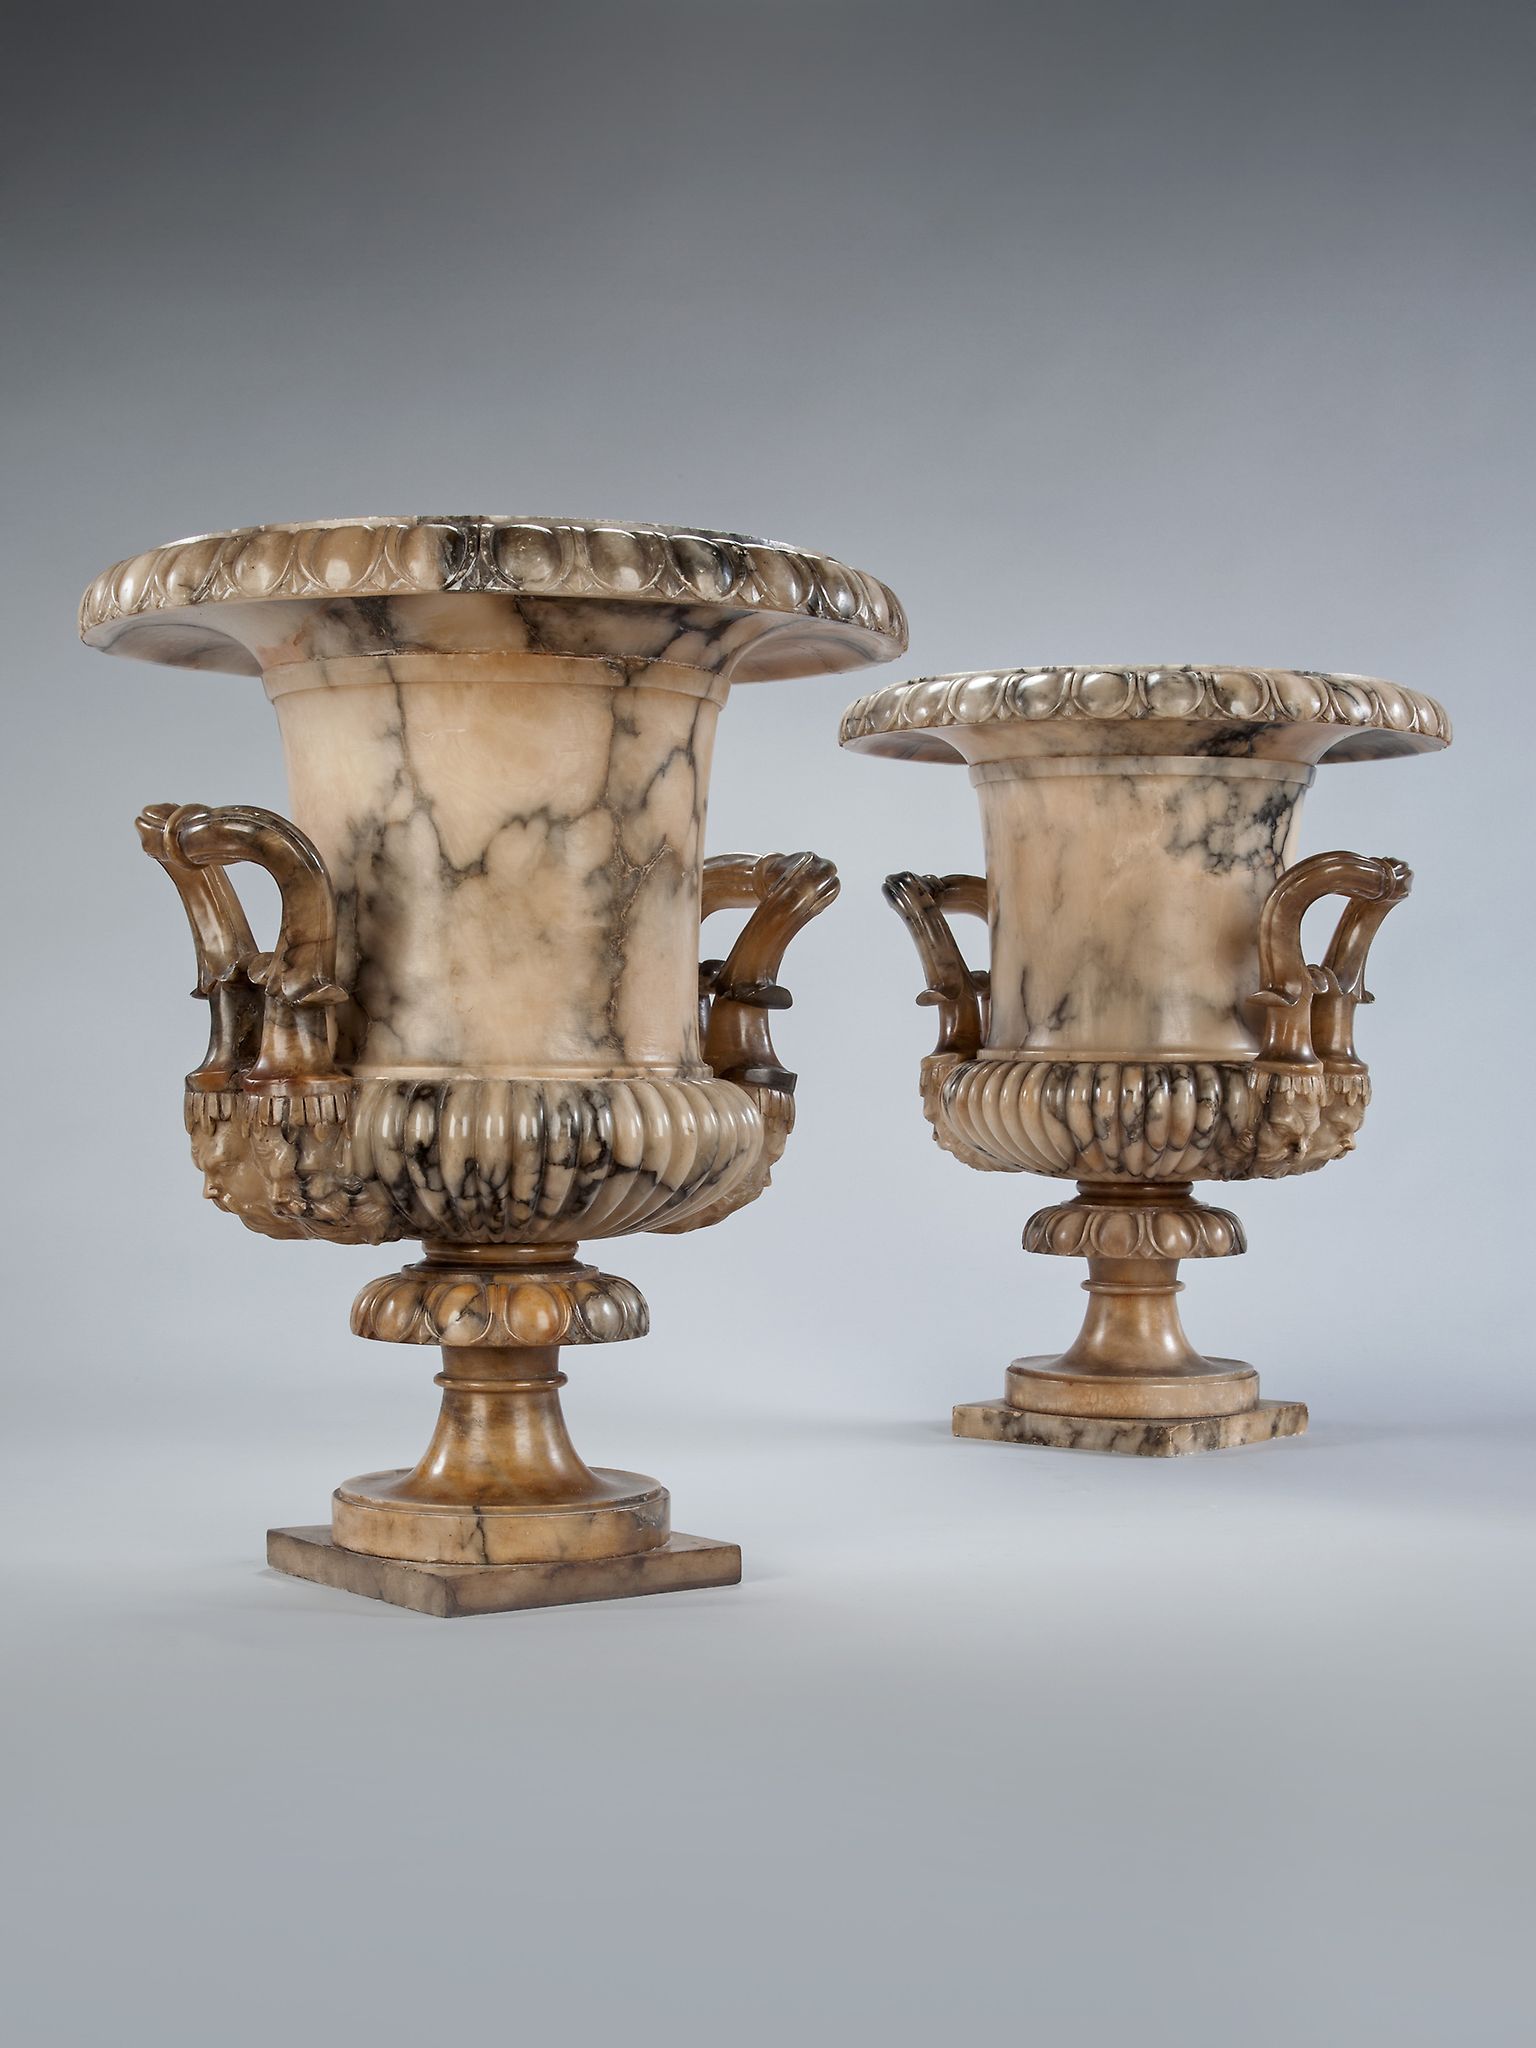 A Pair of 19th Century Italian Alabaster Vases of N eo C lassical Campana shape, the flared